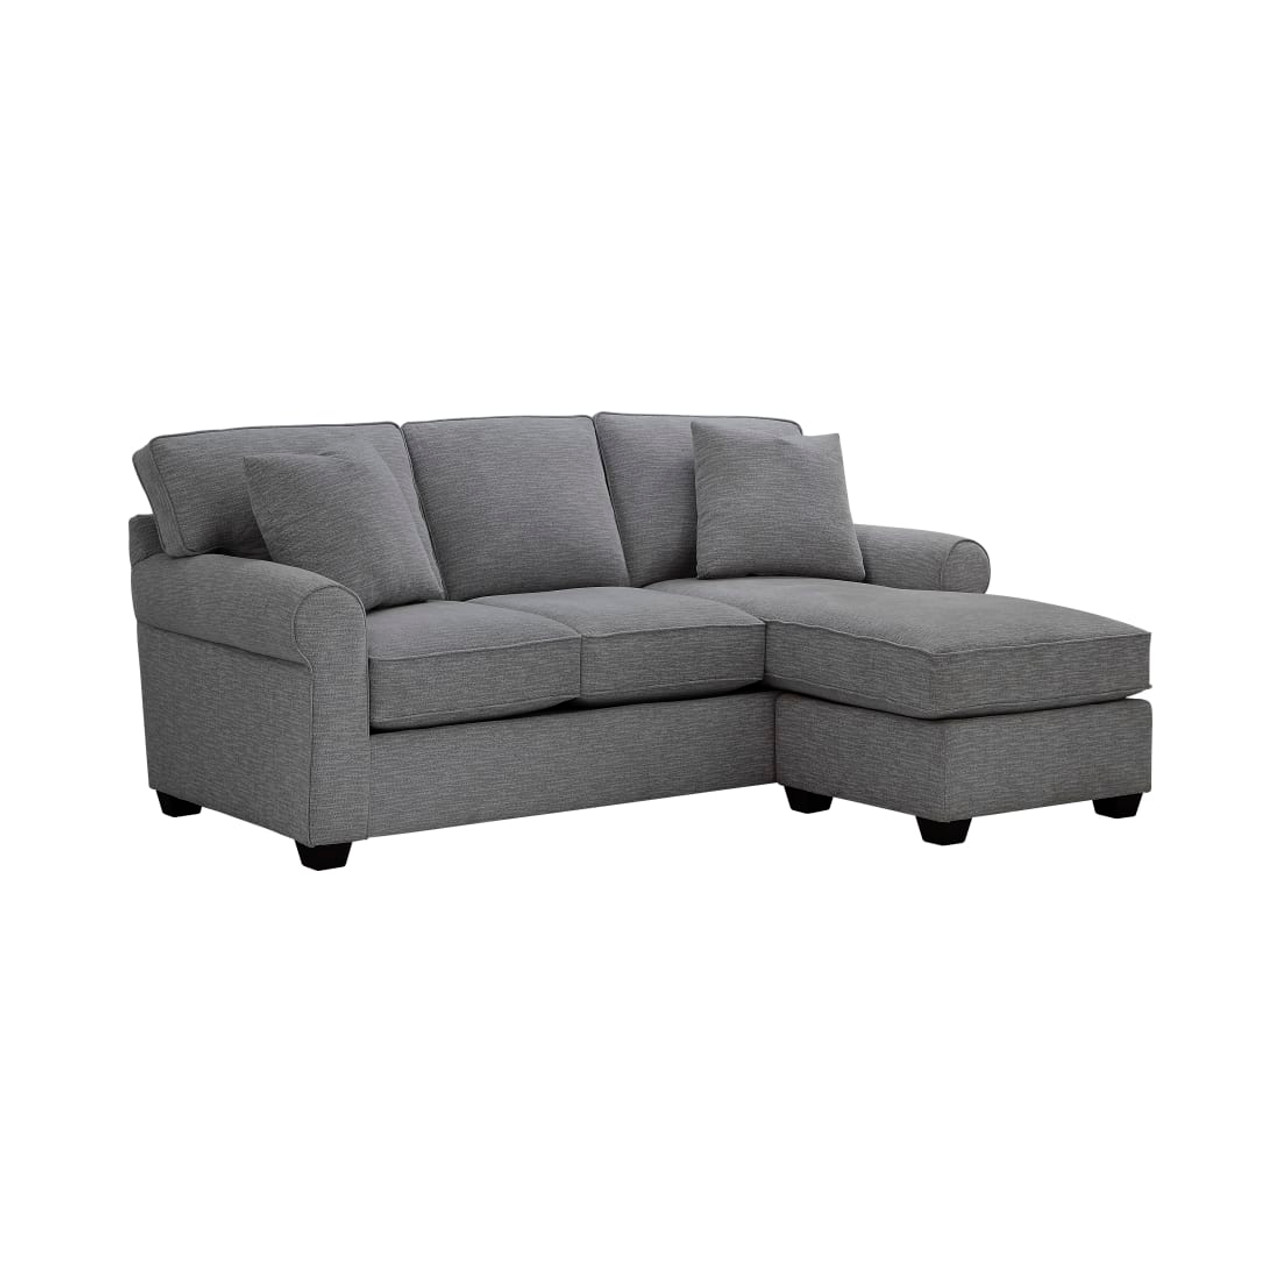 Crestview Rolled Arm Graphite Sofa Chaise